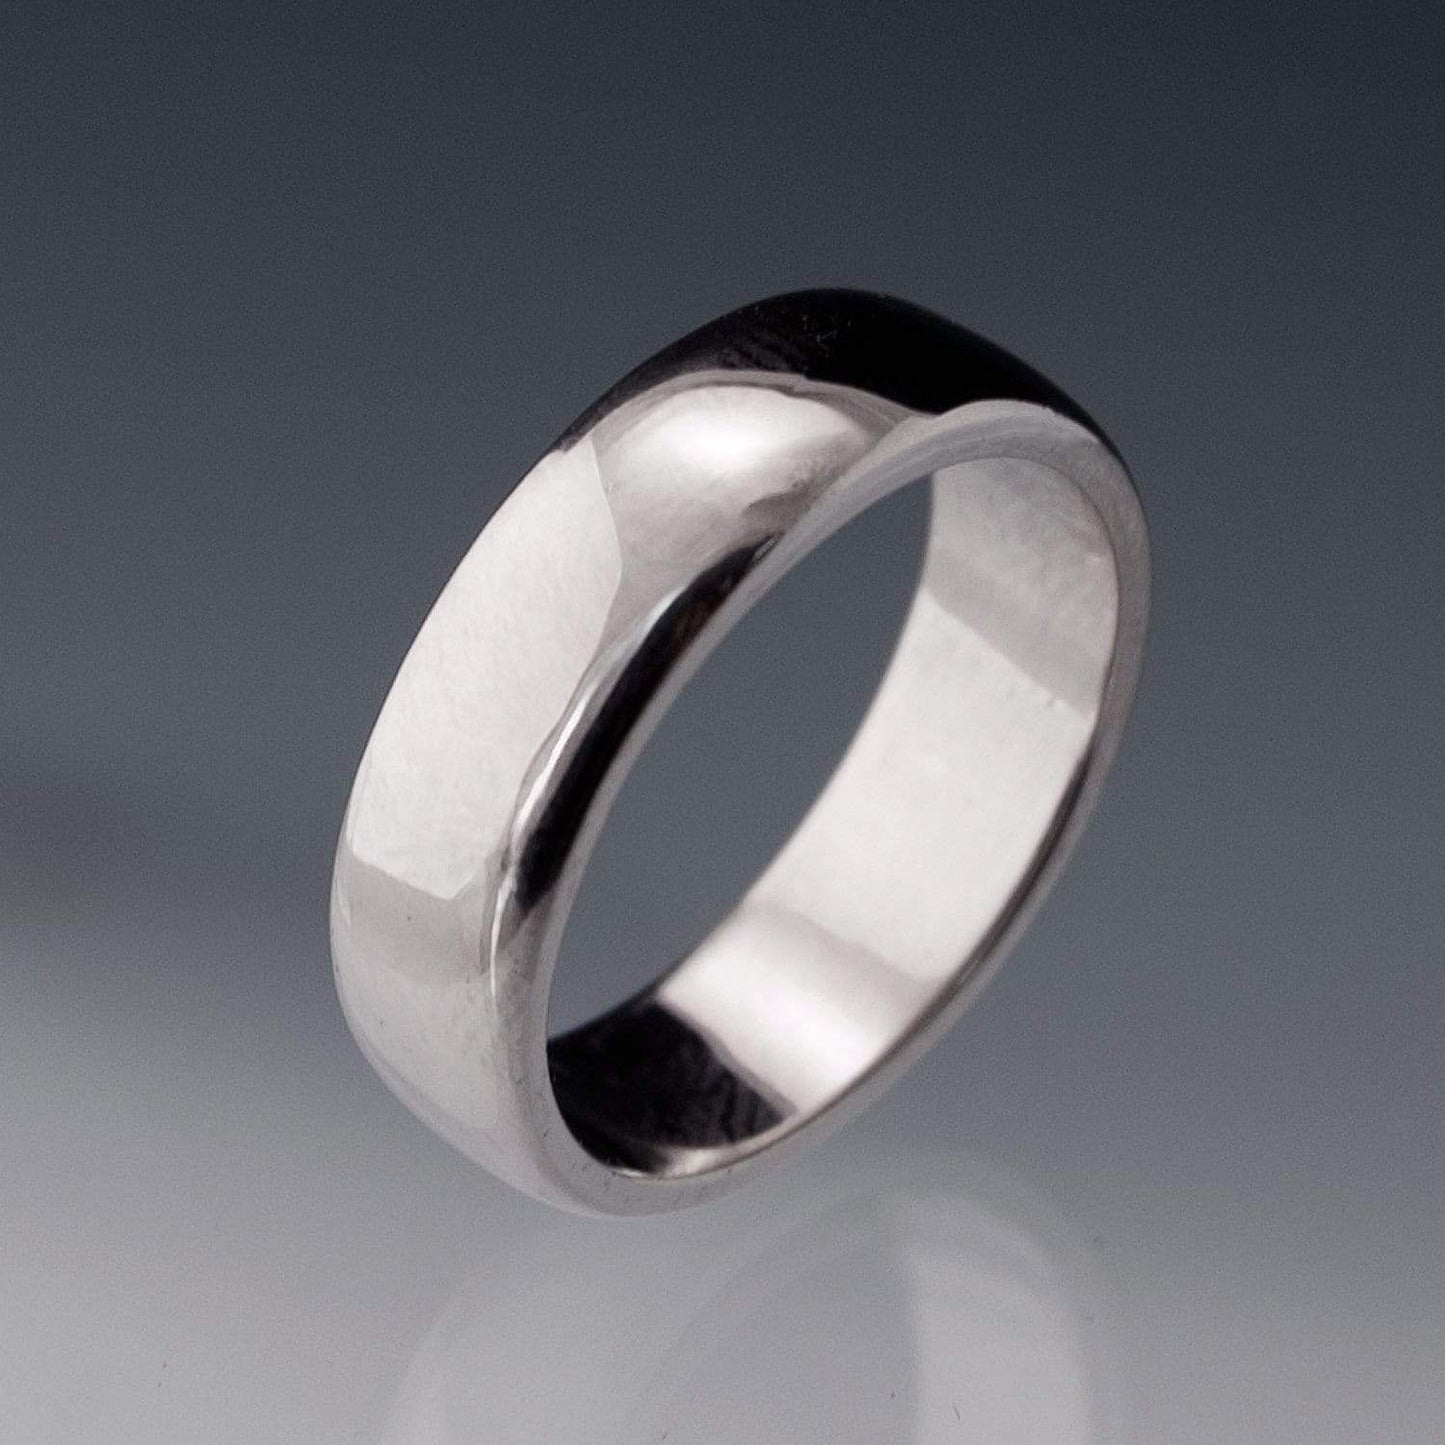 Wide Slightly Domed Modern Simple Wedding Band 5mm / Sterling Silver Ring by Nodeform